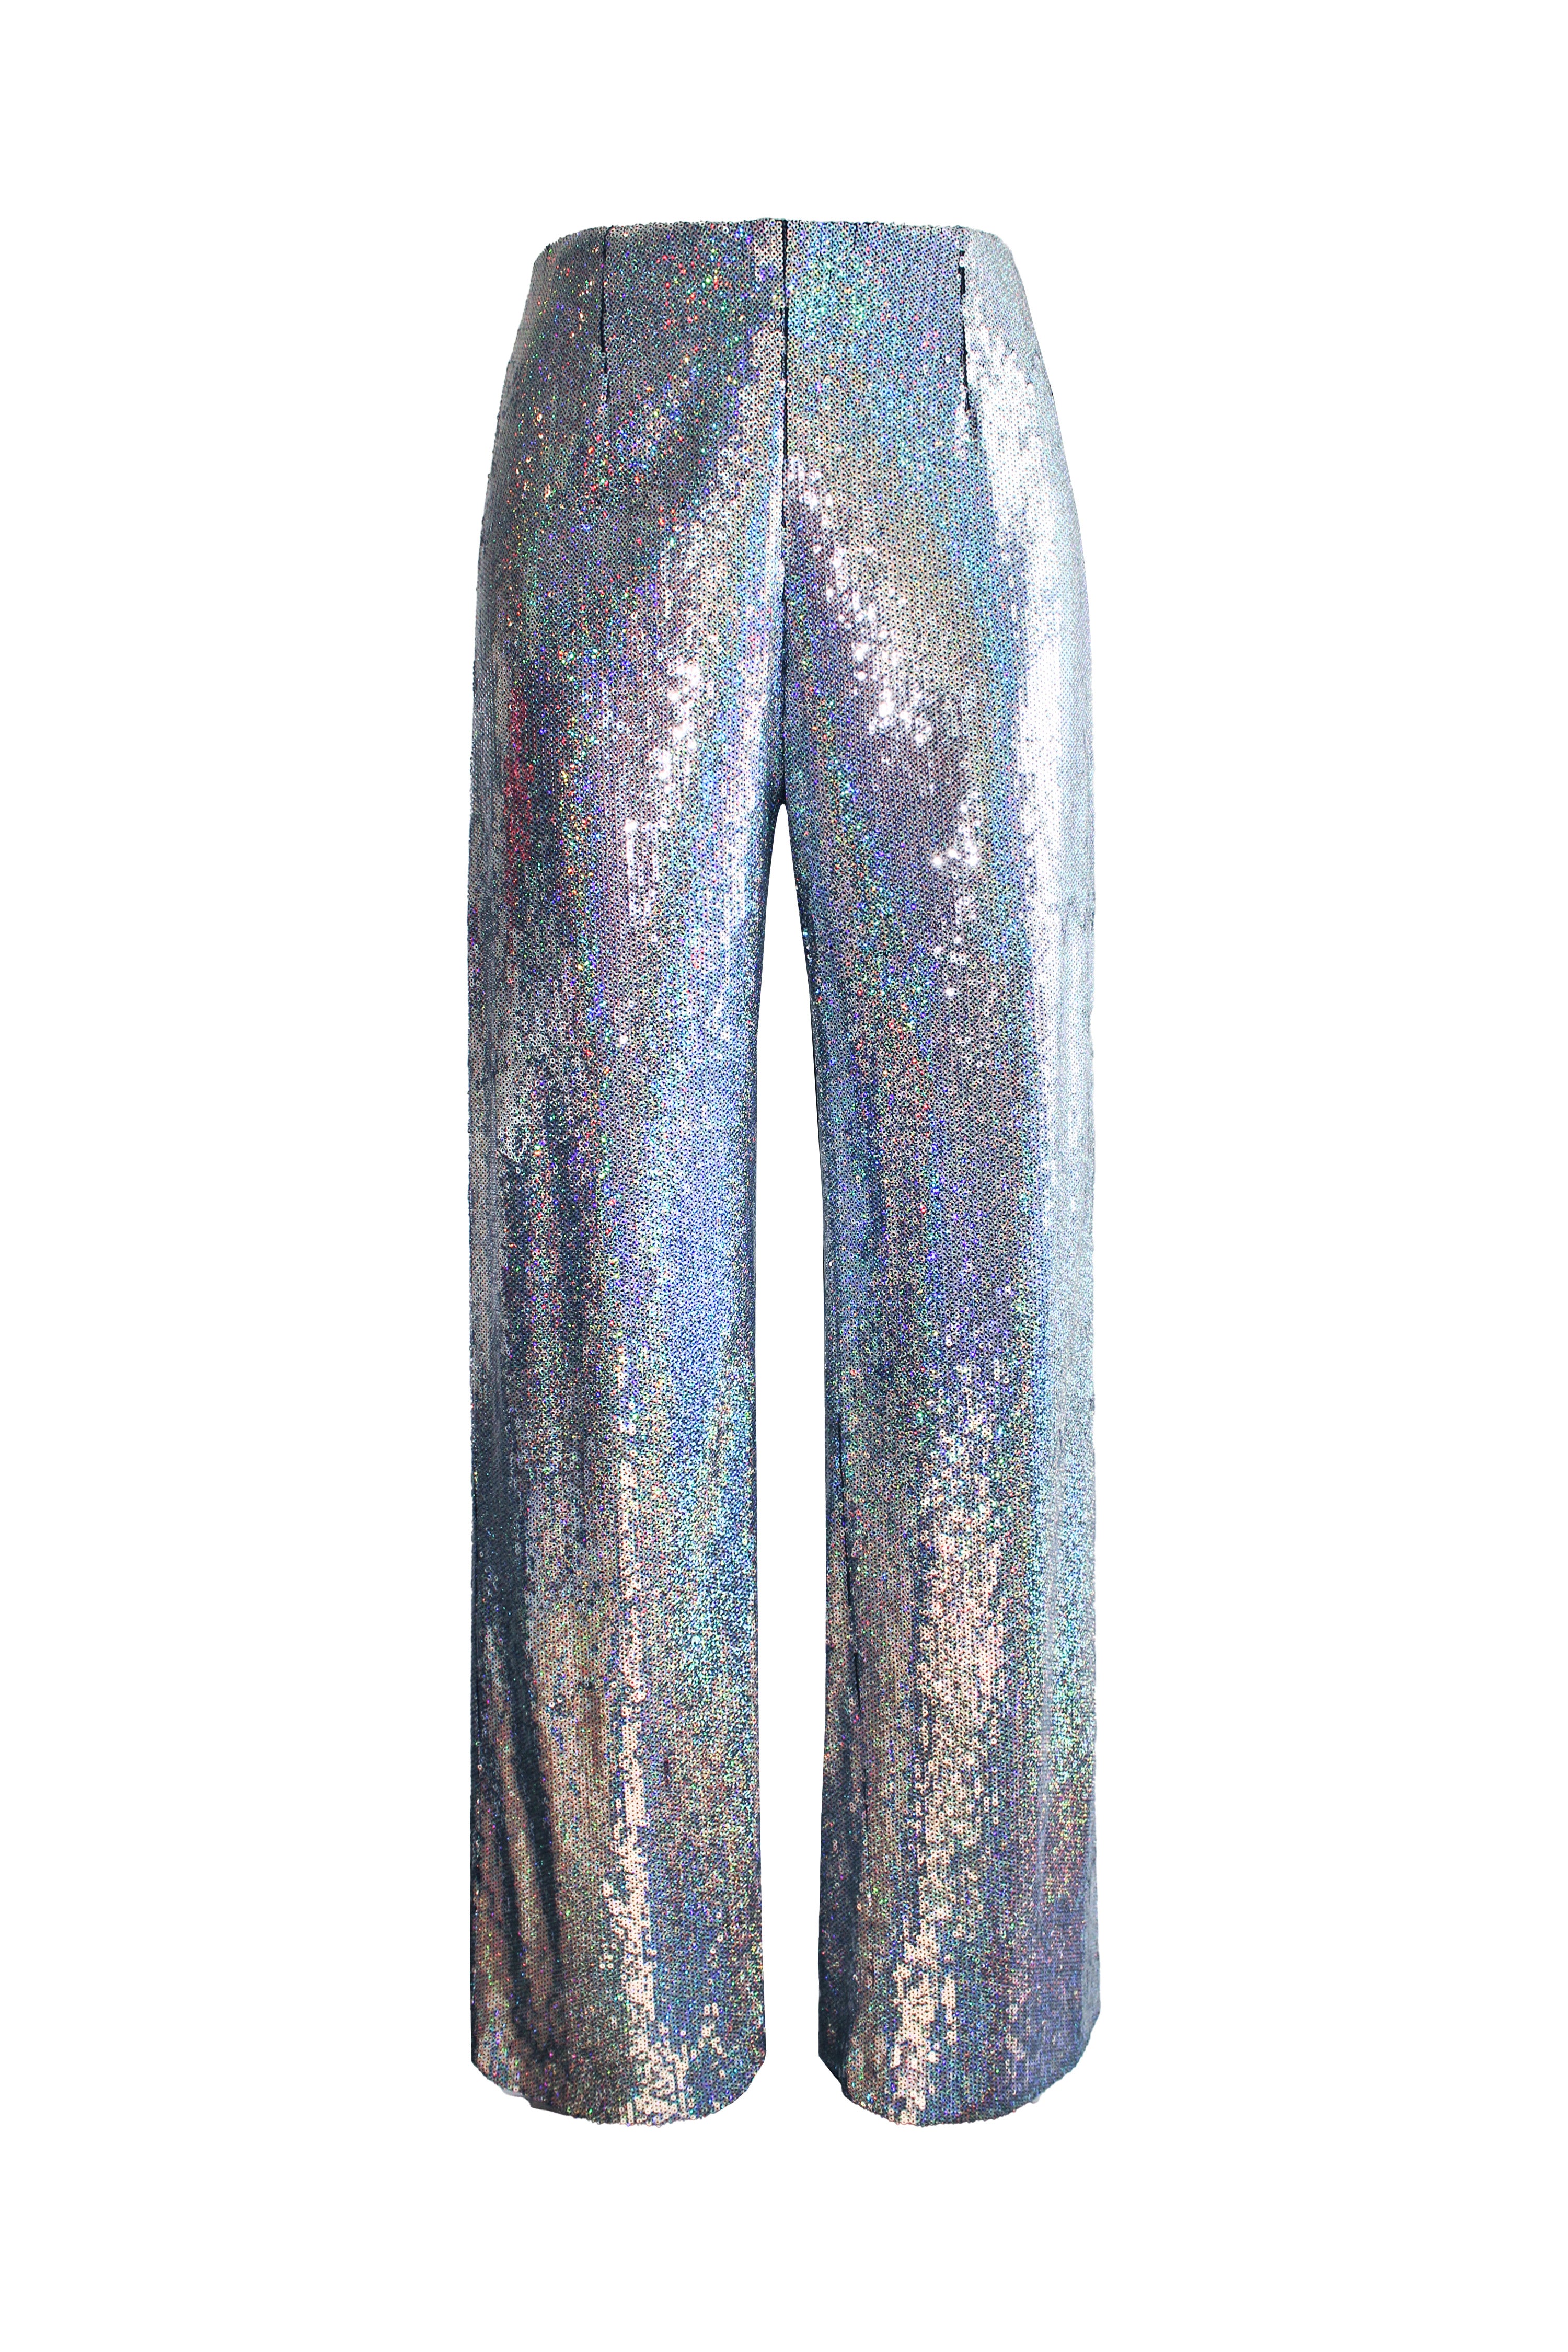 Psychedelic Straight Legged Sequin Pants – L'MOMO